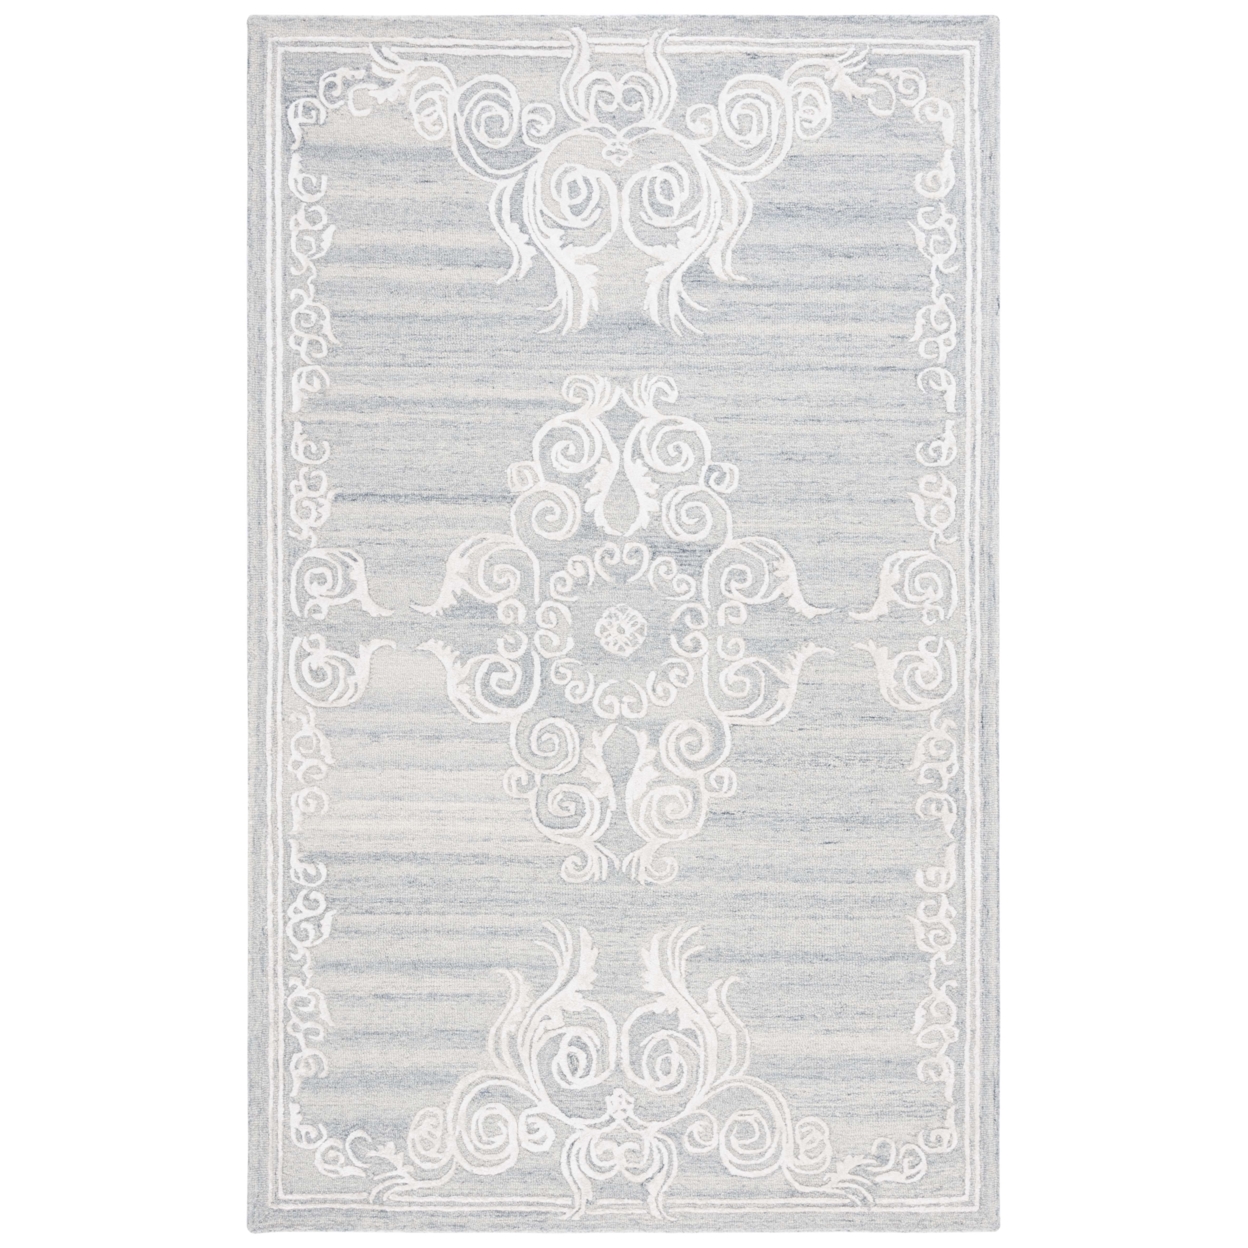 Safavieh GLM604G Glamour Silver / Ivory - Ivory / Brown, 5' X 8' Rectangle